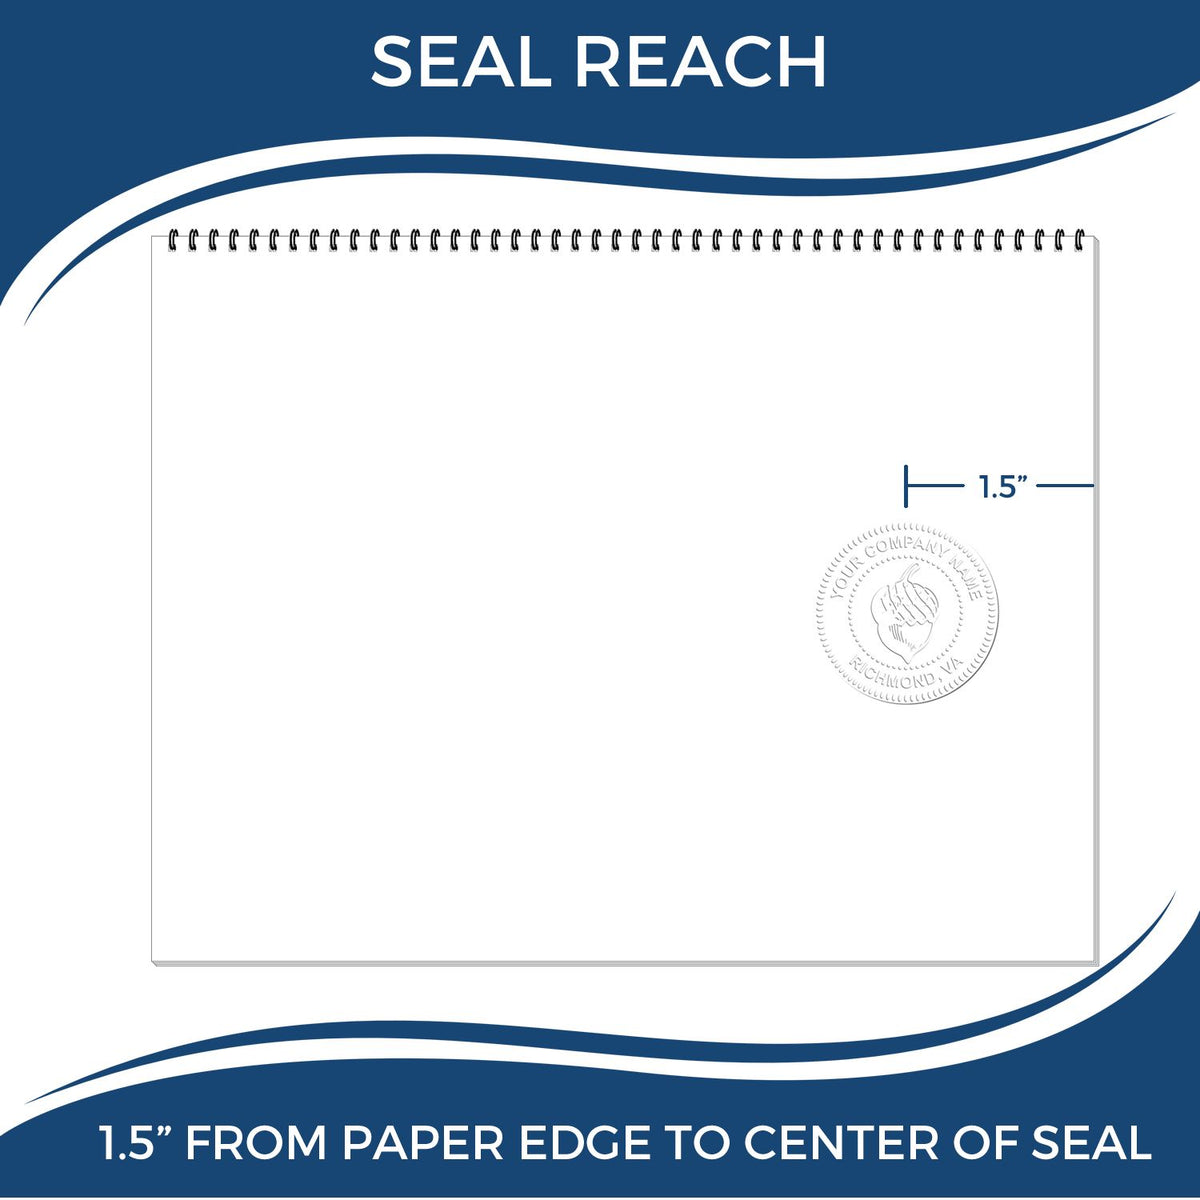 An infographic showing the seal reach which is represented by a ruler and a miniature seal image of the Michigan Geologist Desk Seal